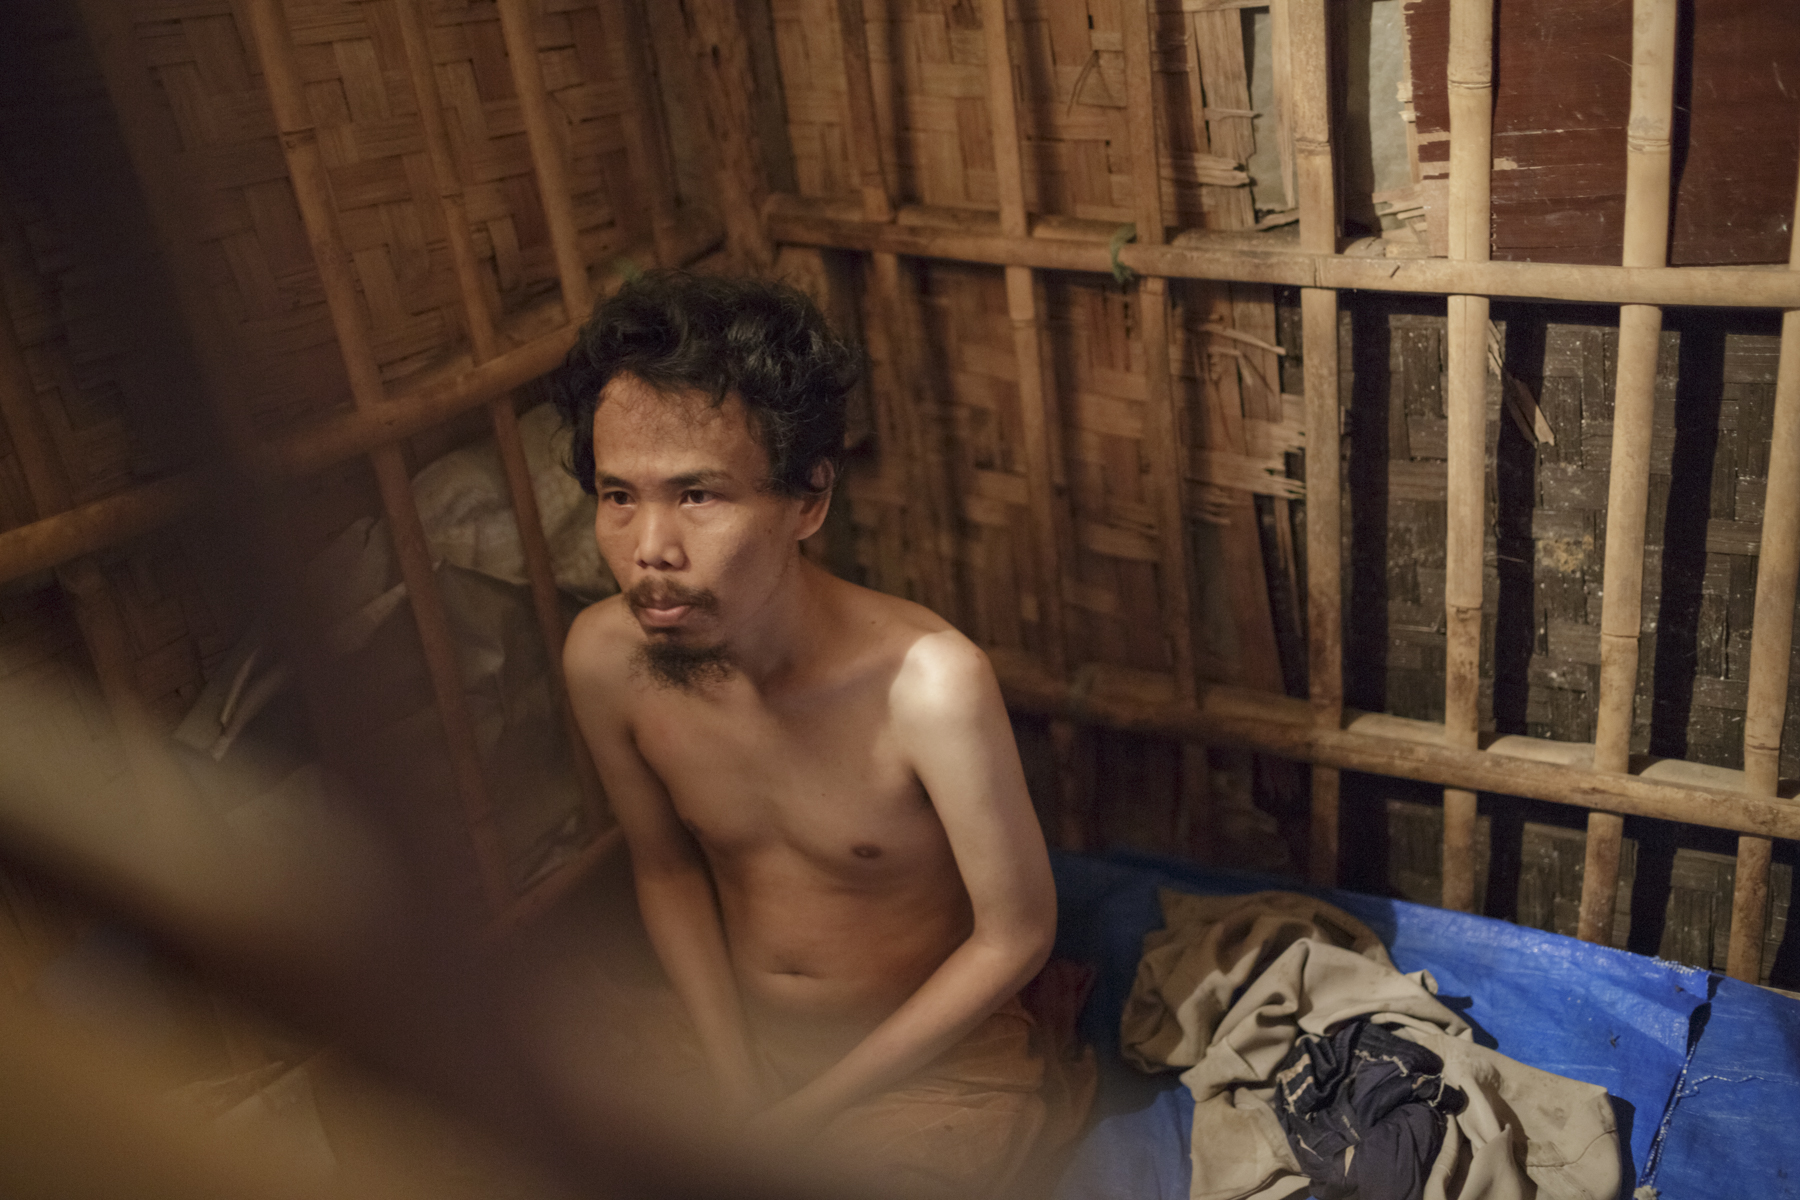 Sodikin, a 34-year-old man with a psychosocial disability who was shackled for more than eight years in a tiny shed outside the family home in Cianjur, West Java. Sodikin was released with the help of a local nongovernmental organization in May 2016. Photo: Andrea Star Reese for Human Rights Watch